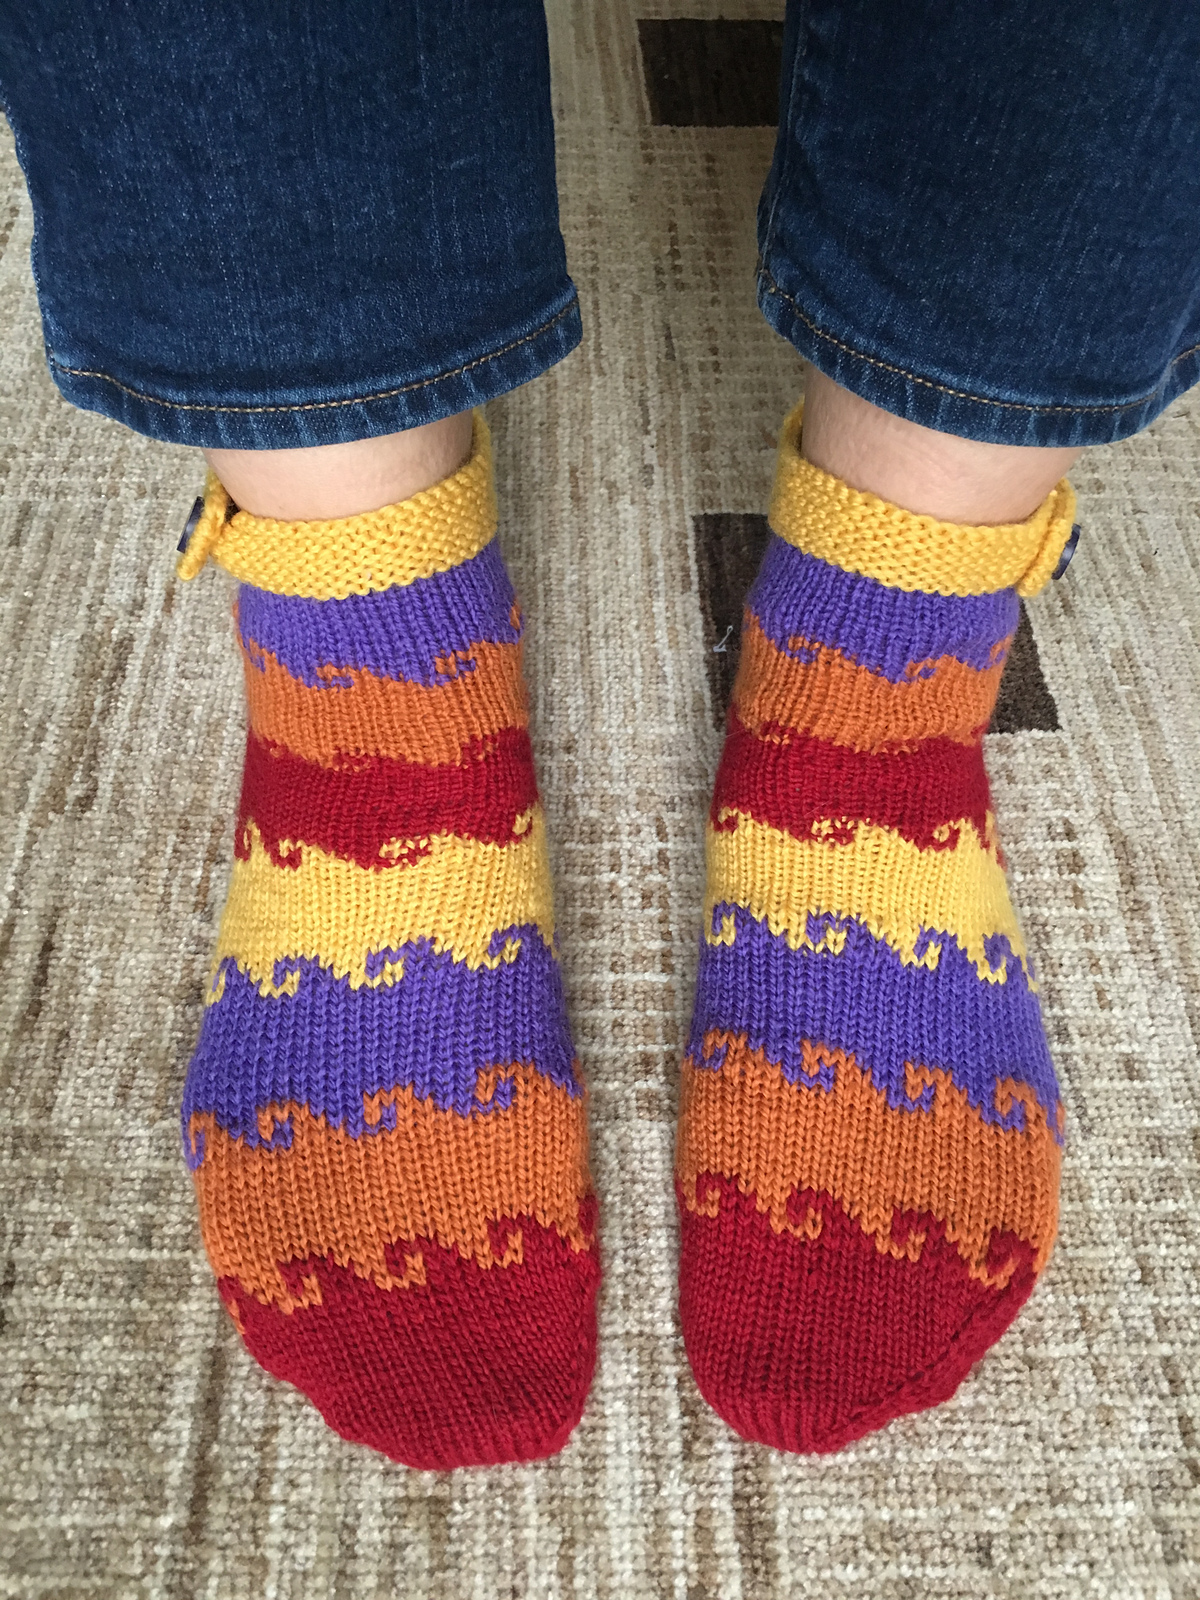 Hand knit socks featuring thick stripes of color and curling flourishes between each stripe